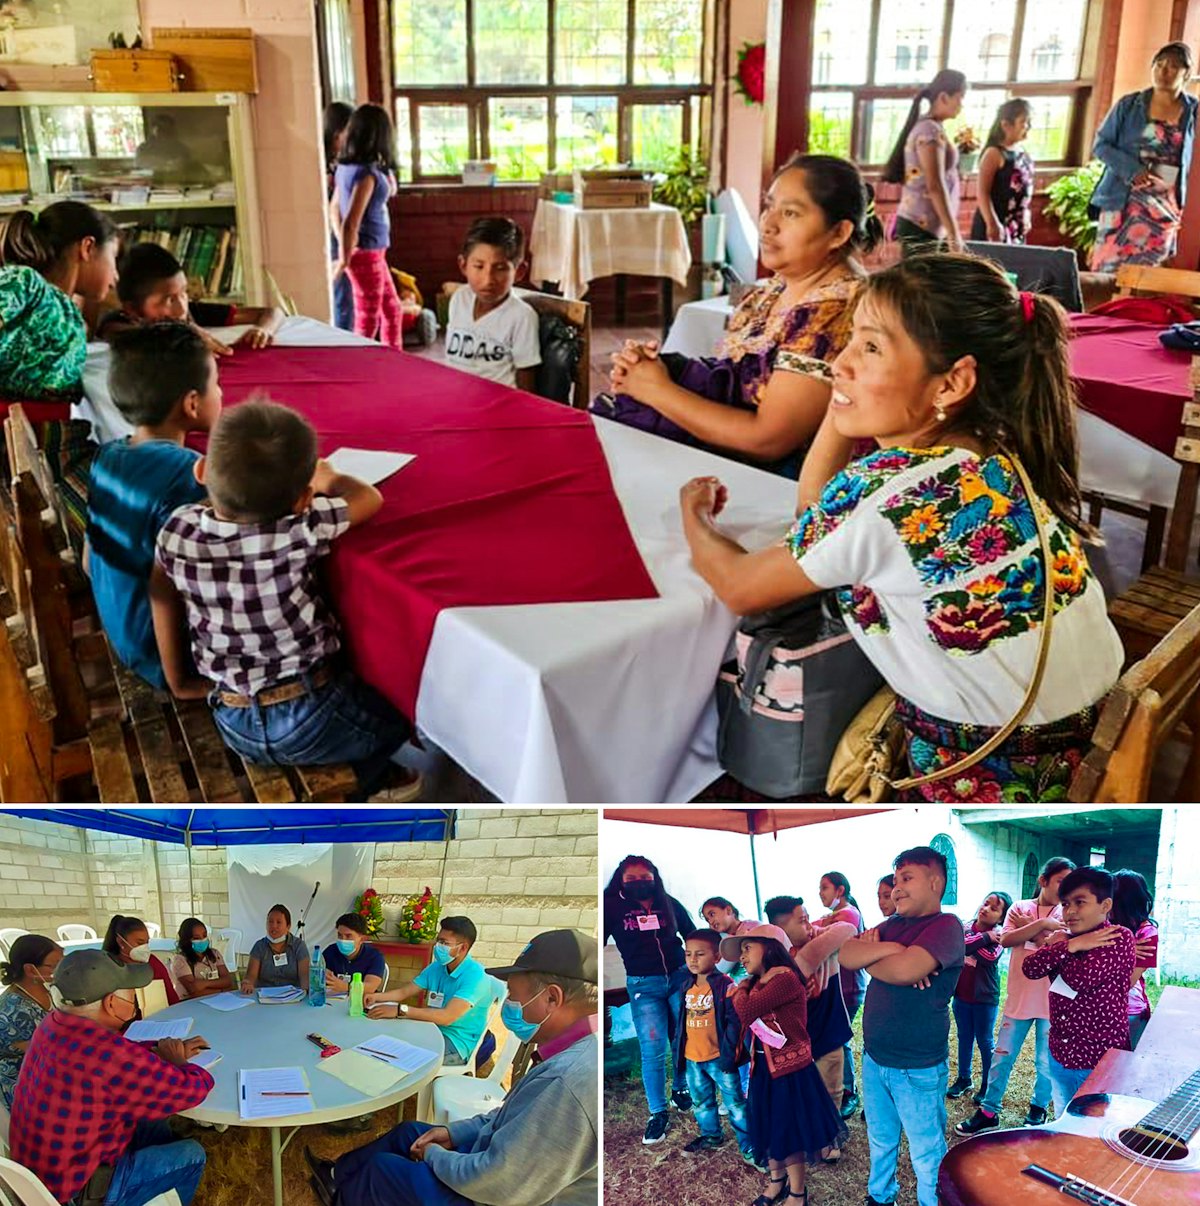 Pictured here are some of the many children and youth who participated at a conference in the north west region of Guatemala.